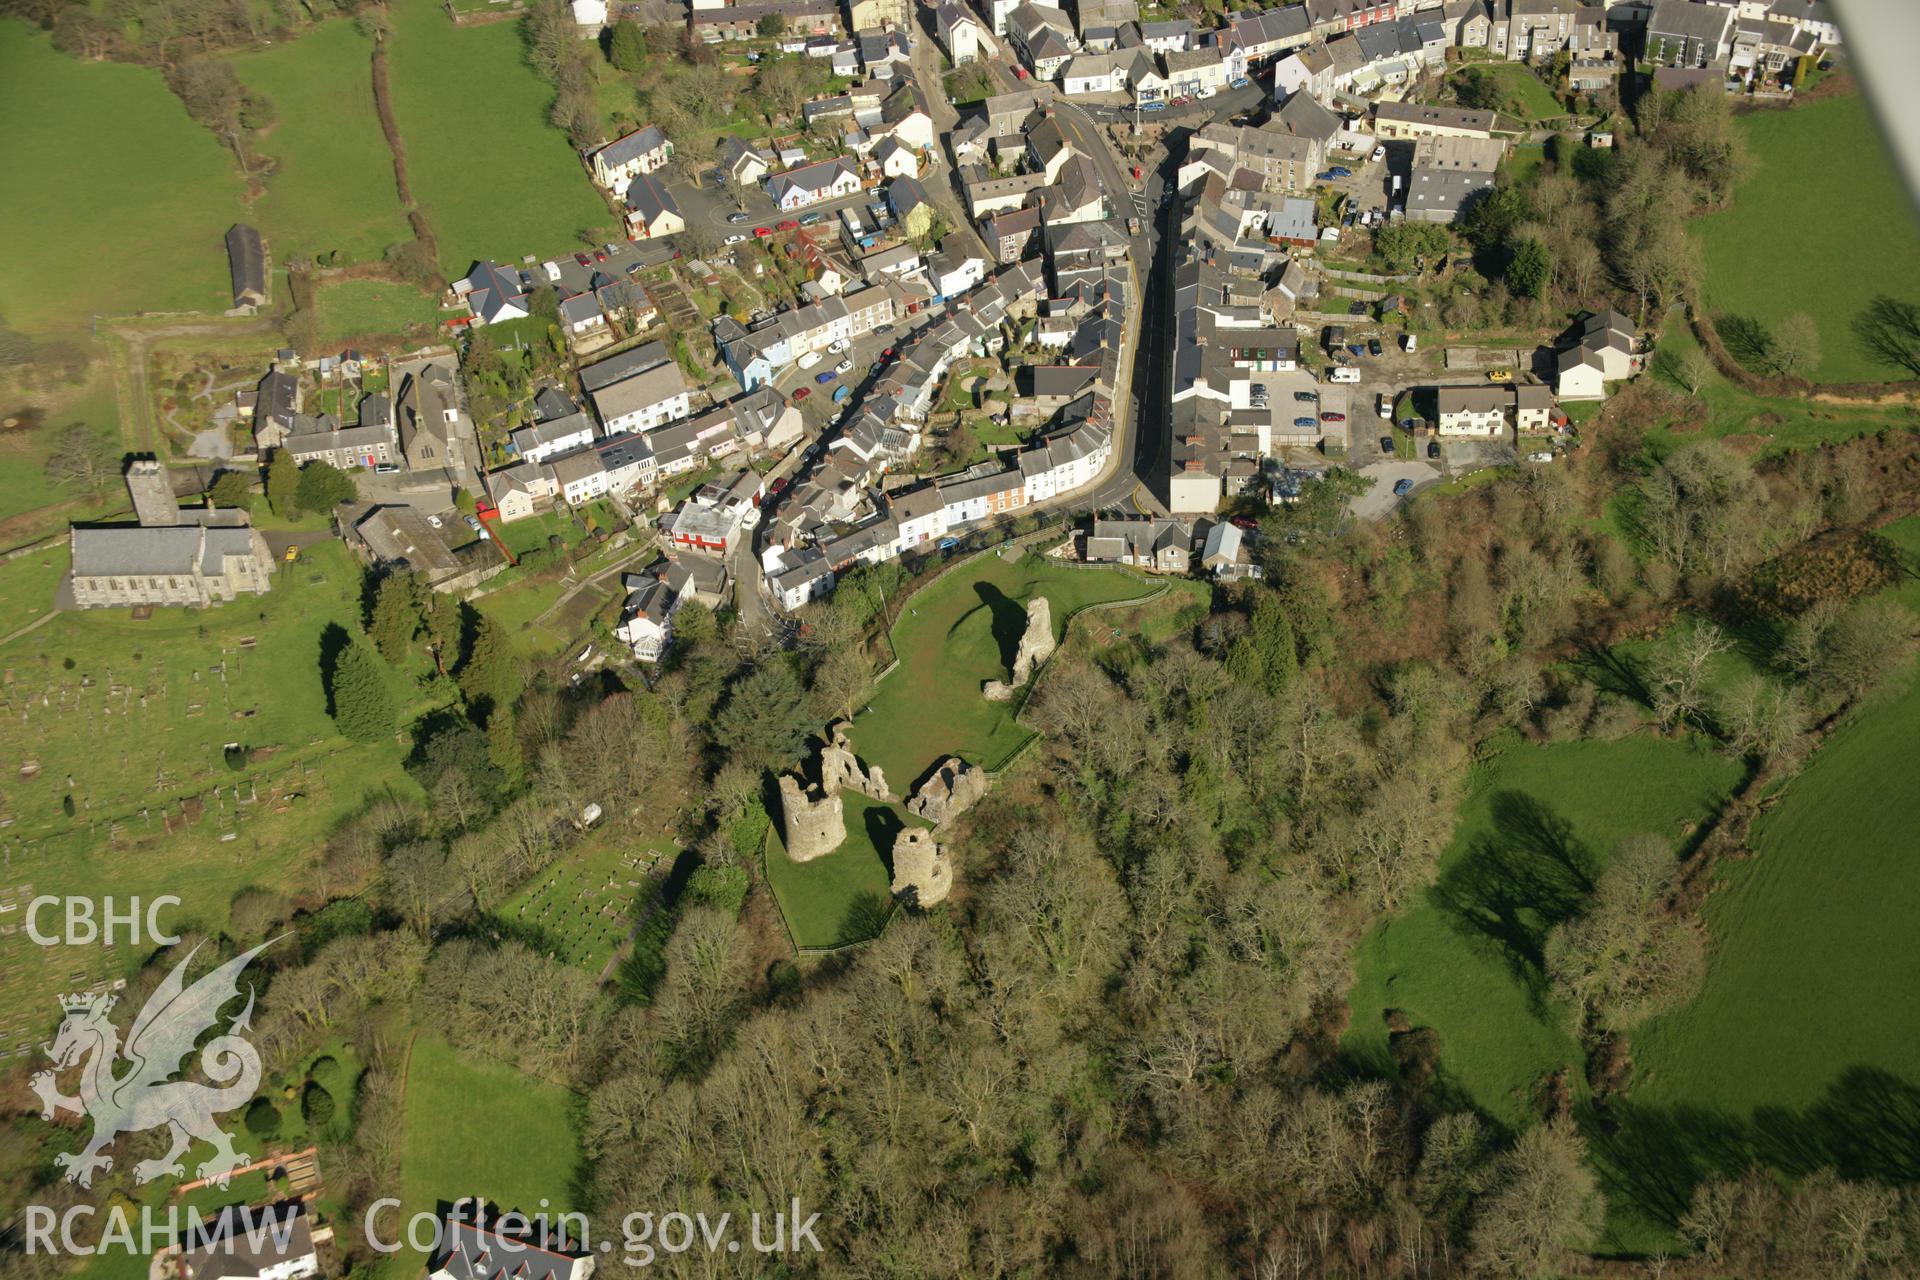 RCAHMW colour oblique aerial photograph of Narberth Castle. Taken on 21 March 2007 by Toby Driver